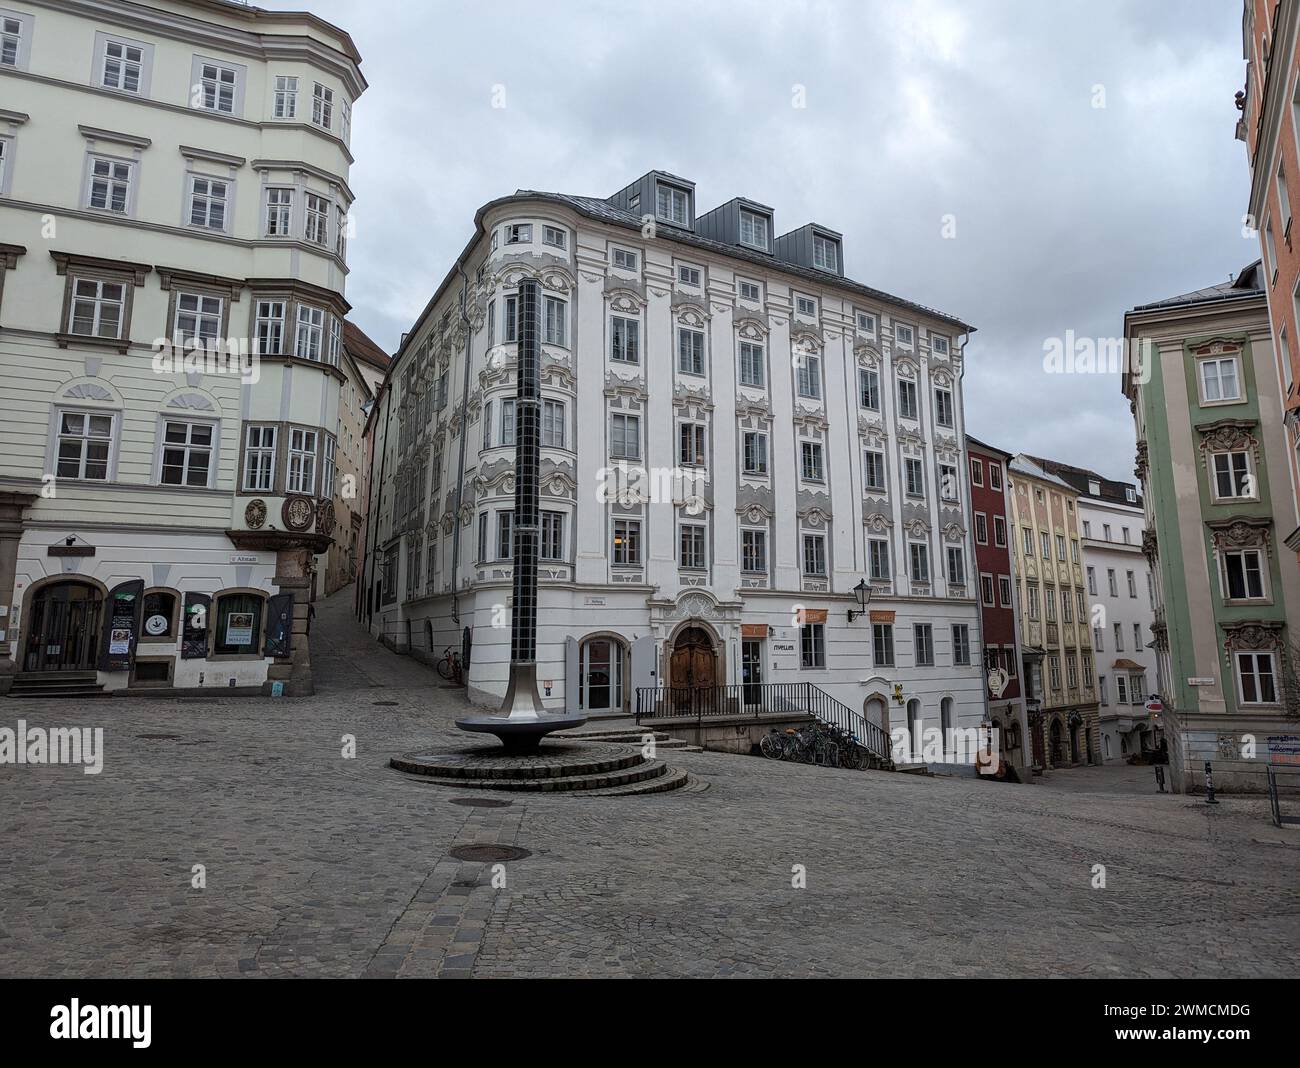 A sculpture seated on a town square's edge in Linz, Austria Stock Photo